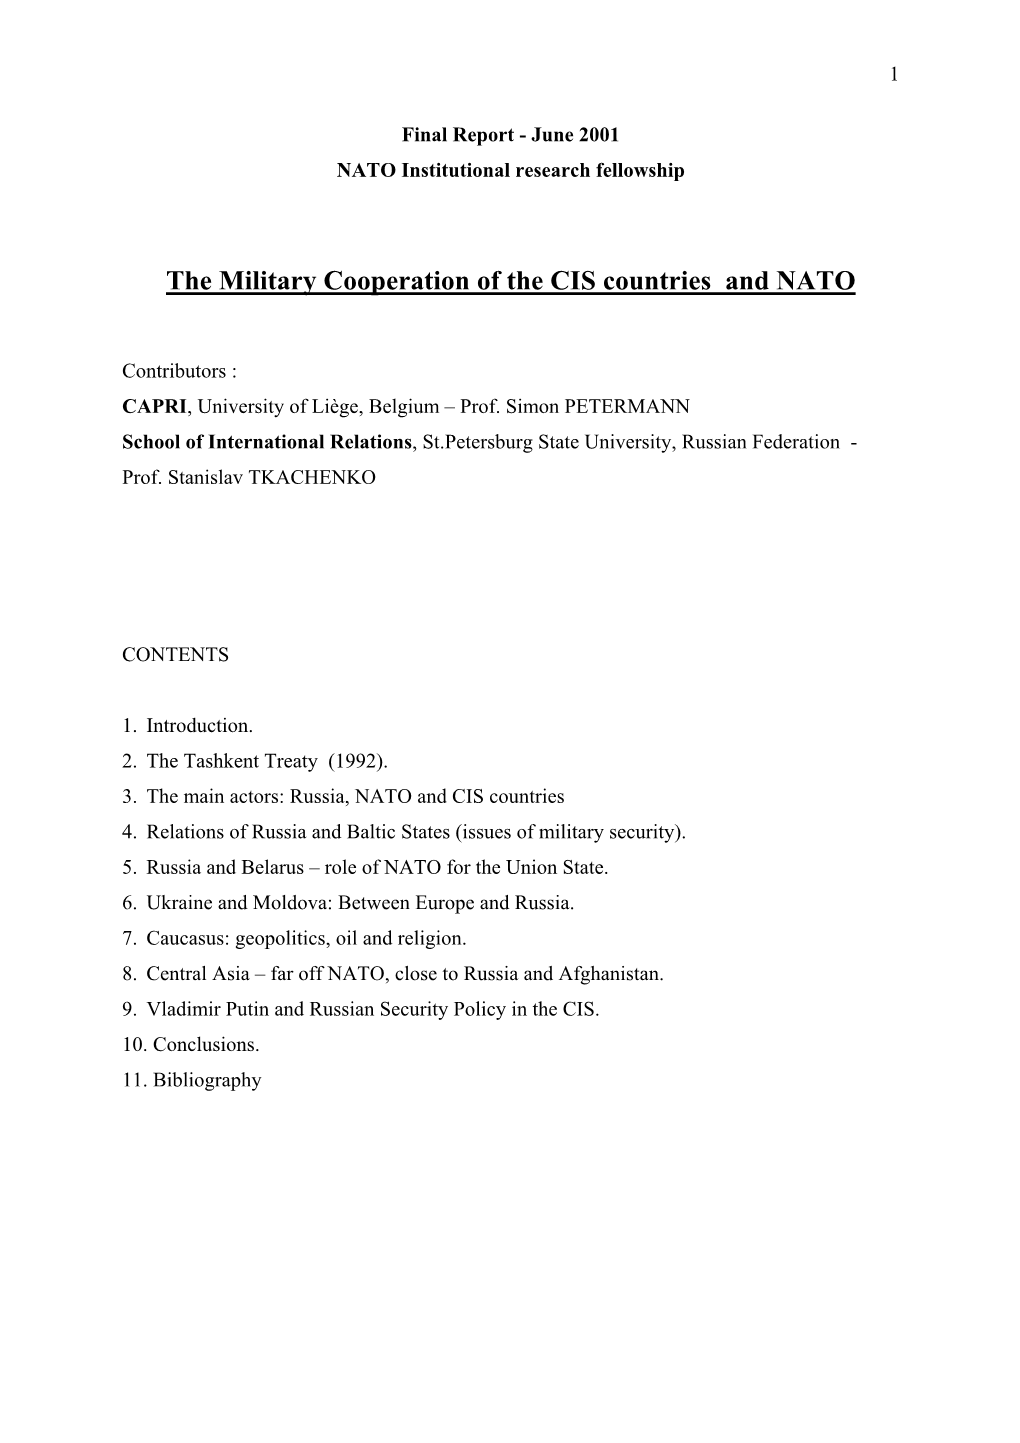 The Military Cooperation of the CIS Countries and NATO